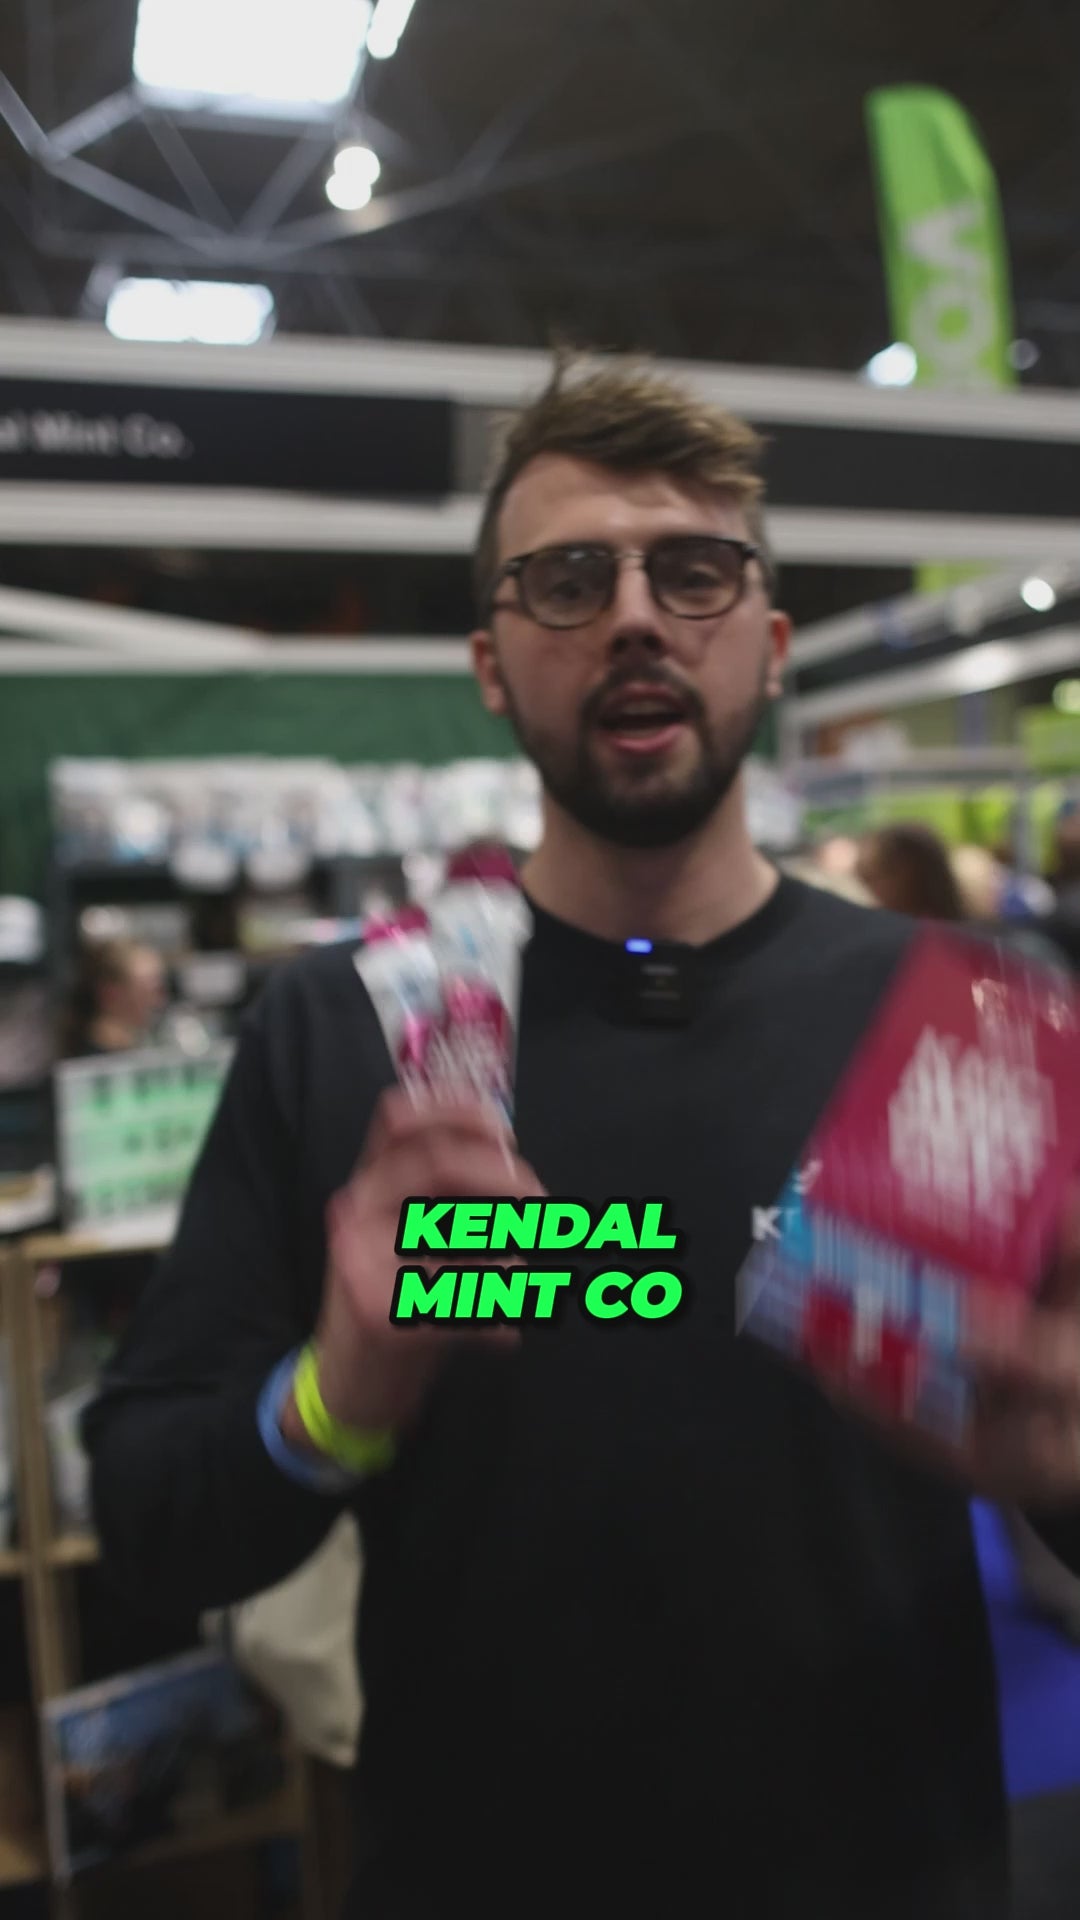 Load video: Kendal Mint Co Energy Gels - What are they?  Energy gels provide a simple way to fuel with carbohydrates during exercise.  Packed with:  27g of Instant and long-lasting carbs, 4 Essential electrolytes to maximise hydration, 4 B Vitamins  They’re also:  Easy on the stomach, Vegan, Gluten-Free